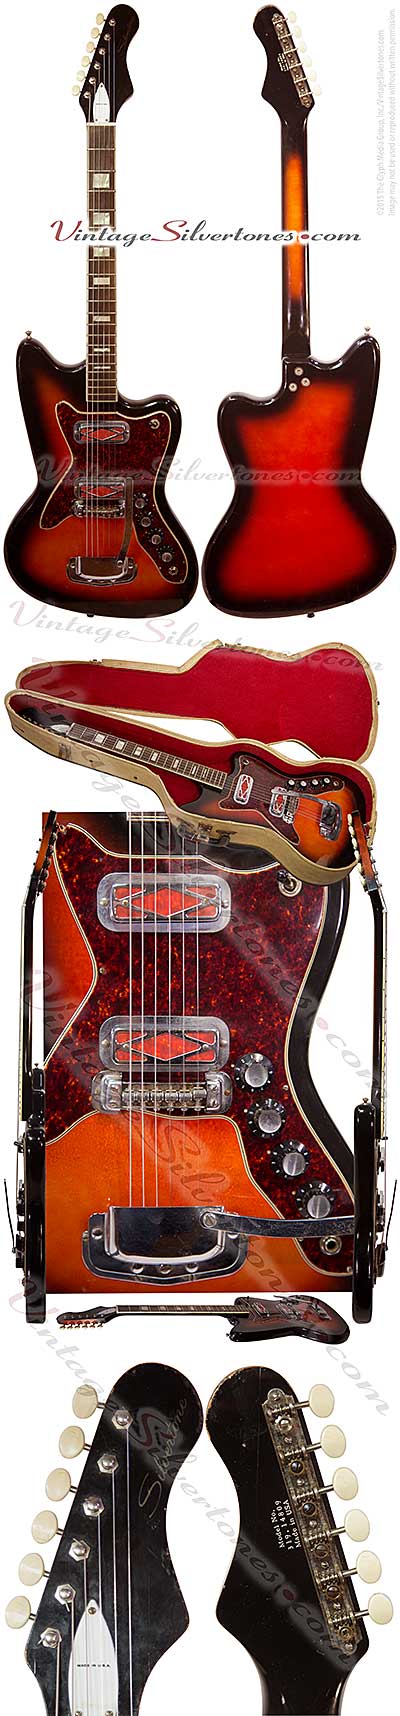 Silvertone - Harmony-made solid body, 2 pickup electric guitar in sunburst with red prickups for Christmas 1967, made in Chicago IL USA